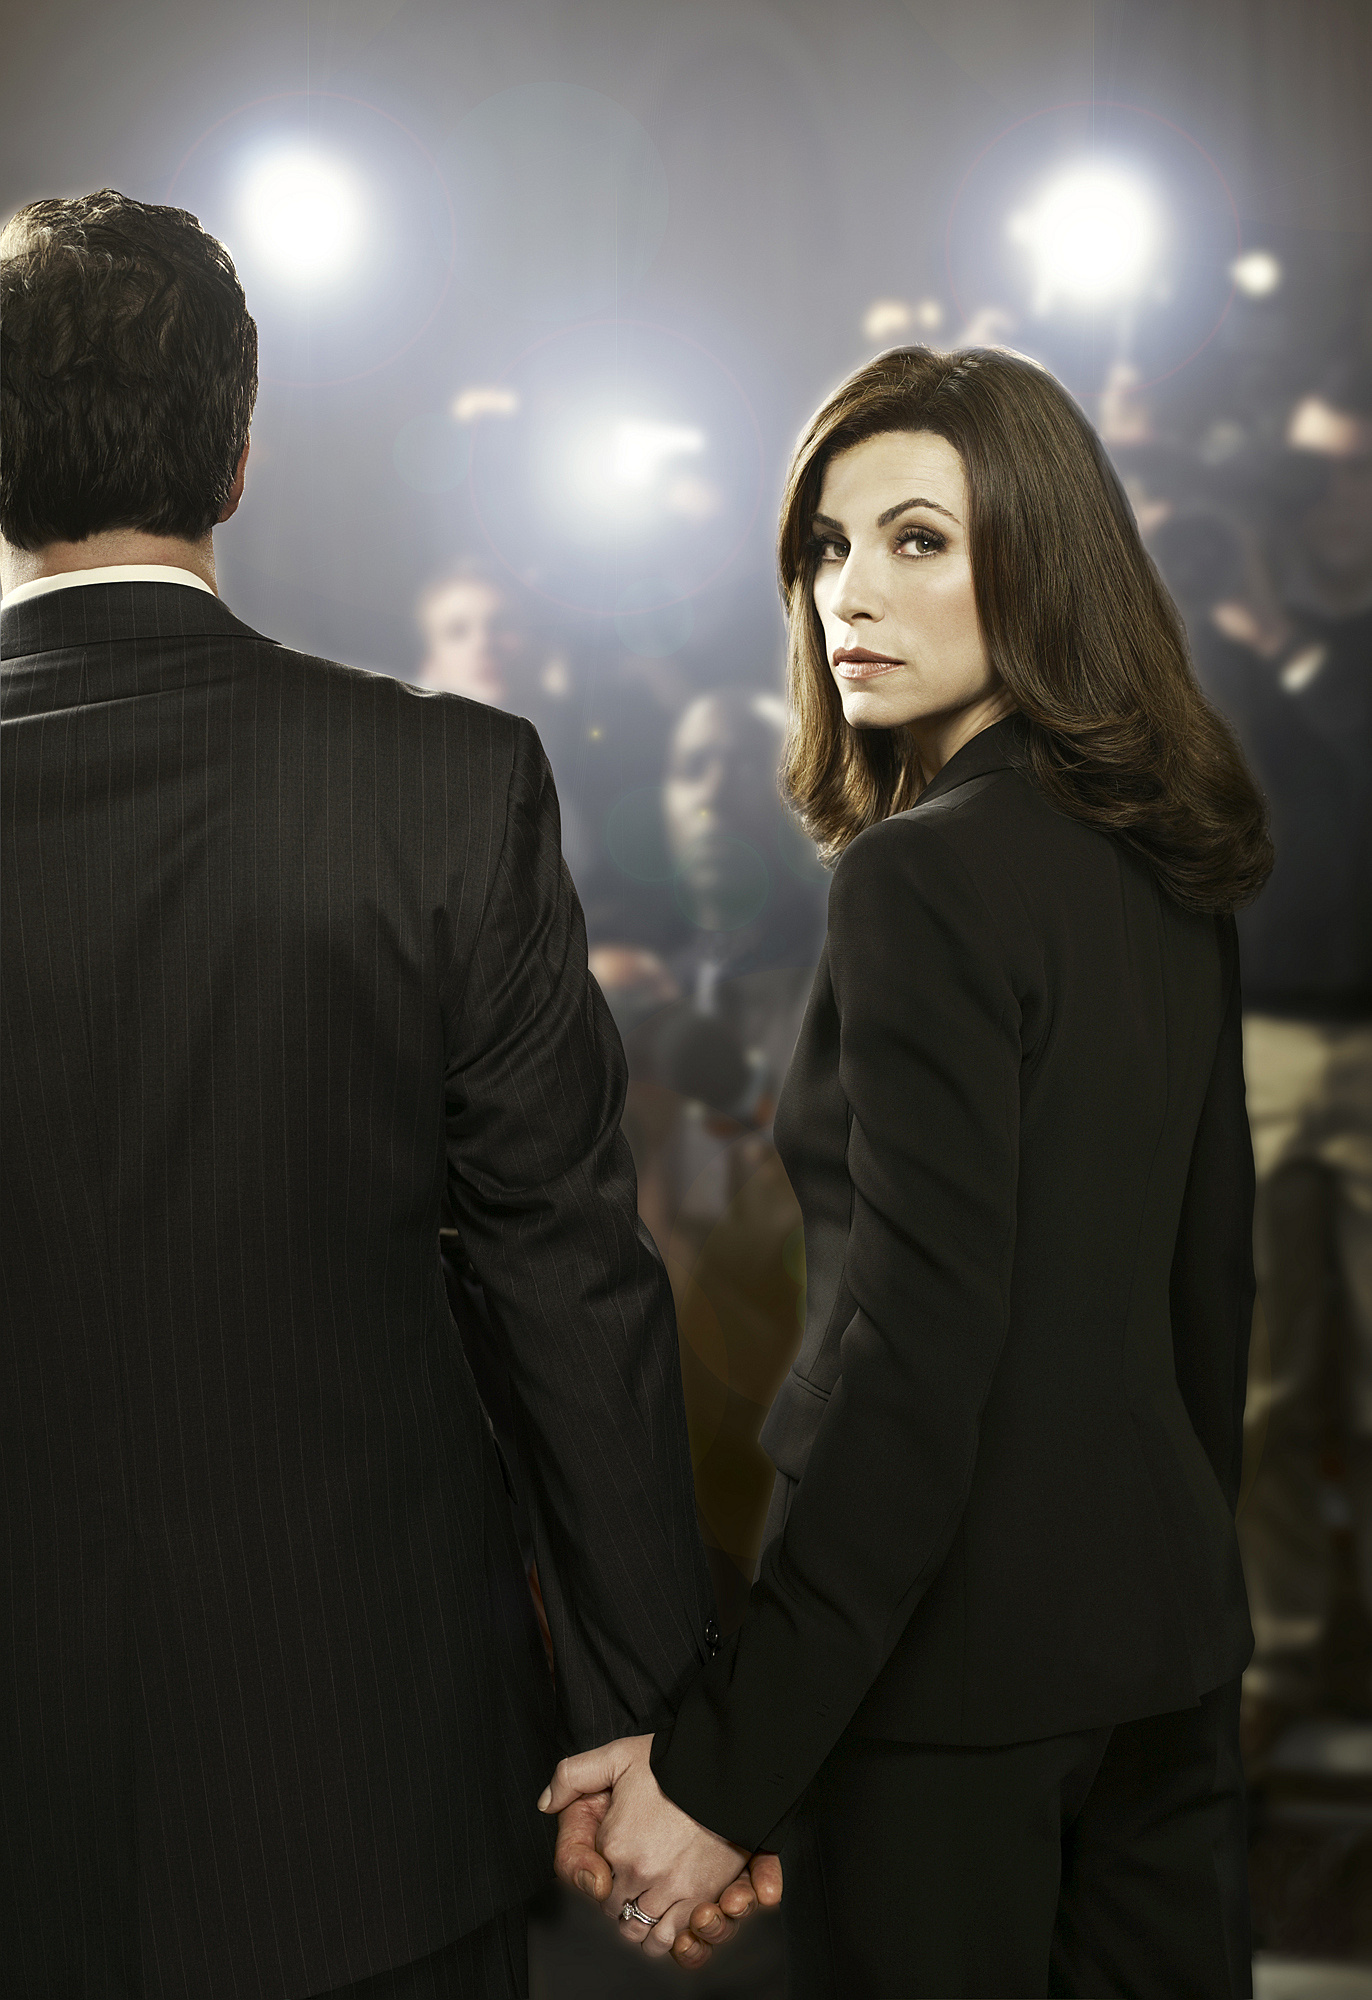 The Good Wife (TV Series): The drama starring Julianna Margulies as Alicia Florrick, One of the biggest shows of the mid-2010s. 1380x2000 HD Background.